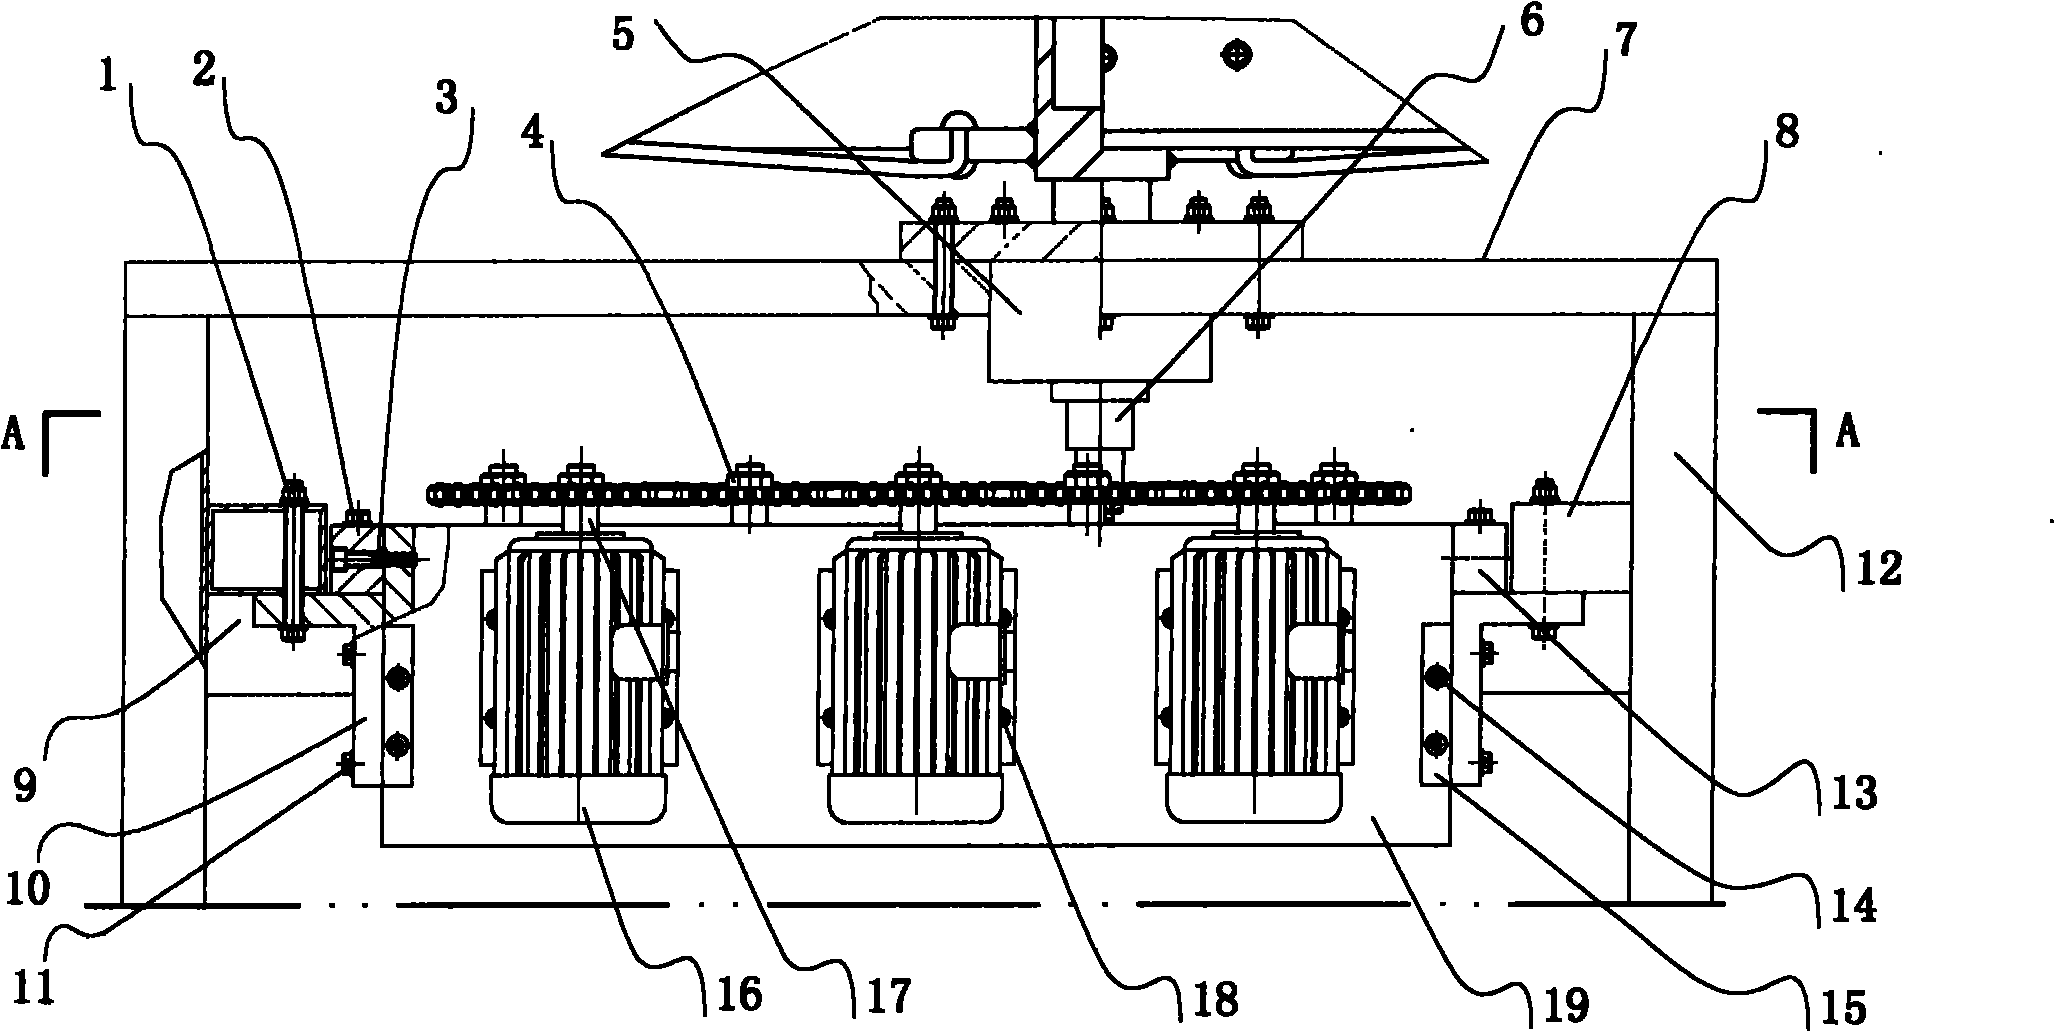 Fabrication scheme for voltage-stabilized current-regulated wind turbine generator system